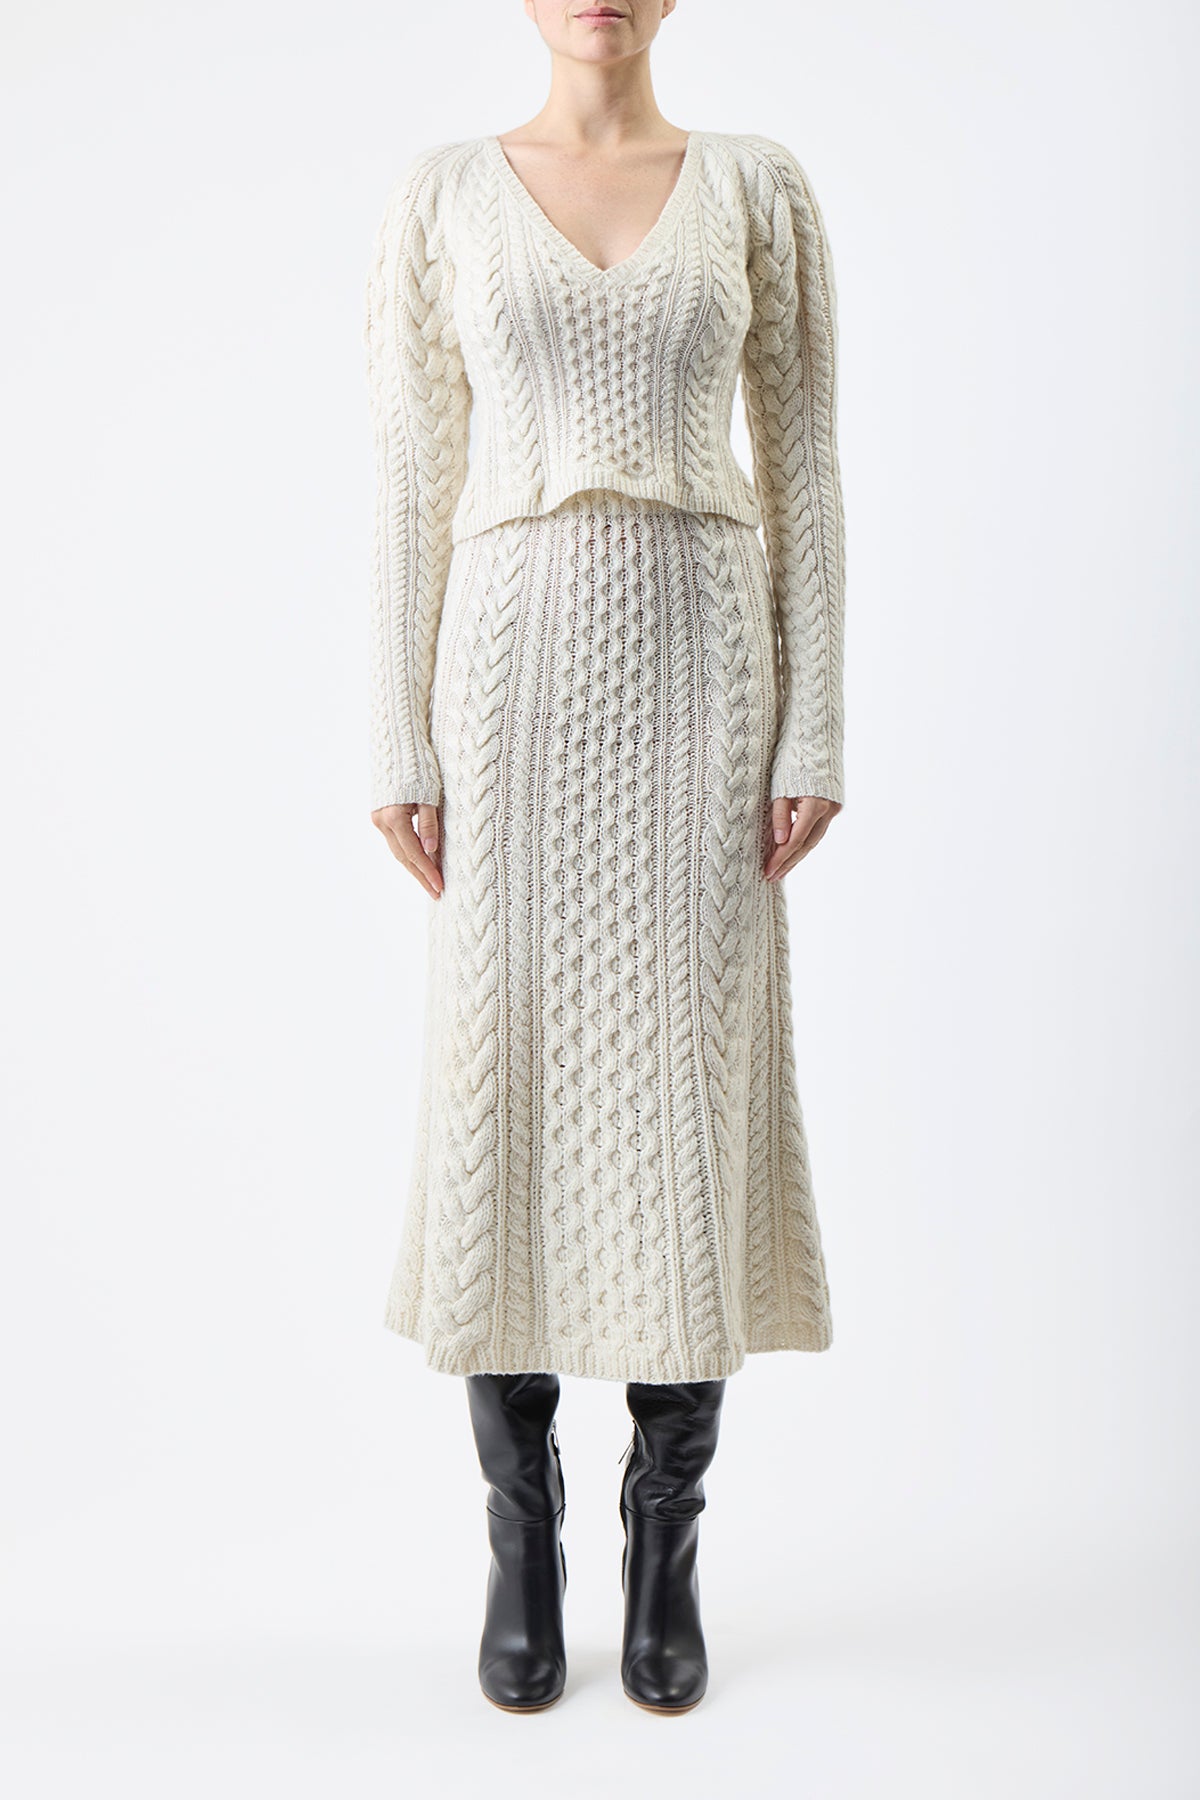 Callum Knit Skirt in Ivory Cashmere